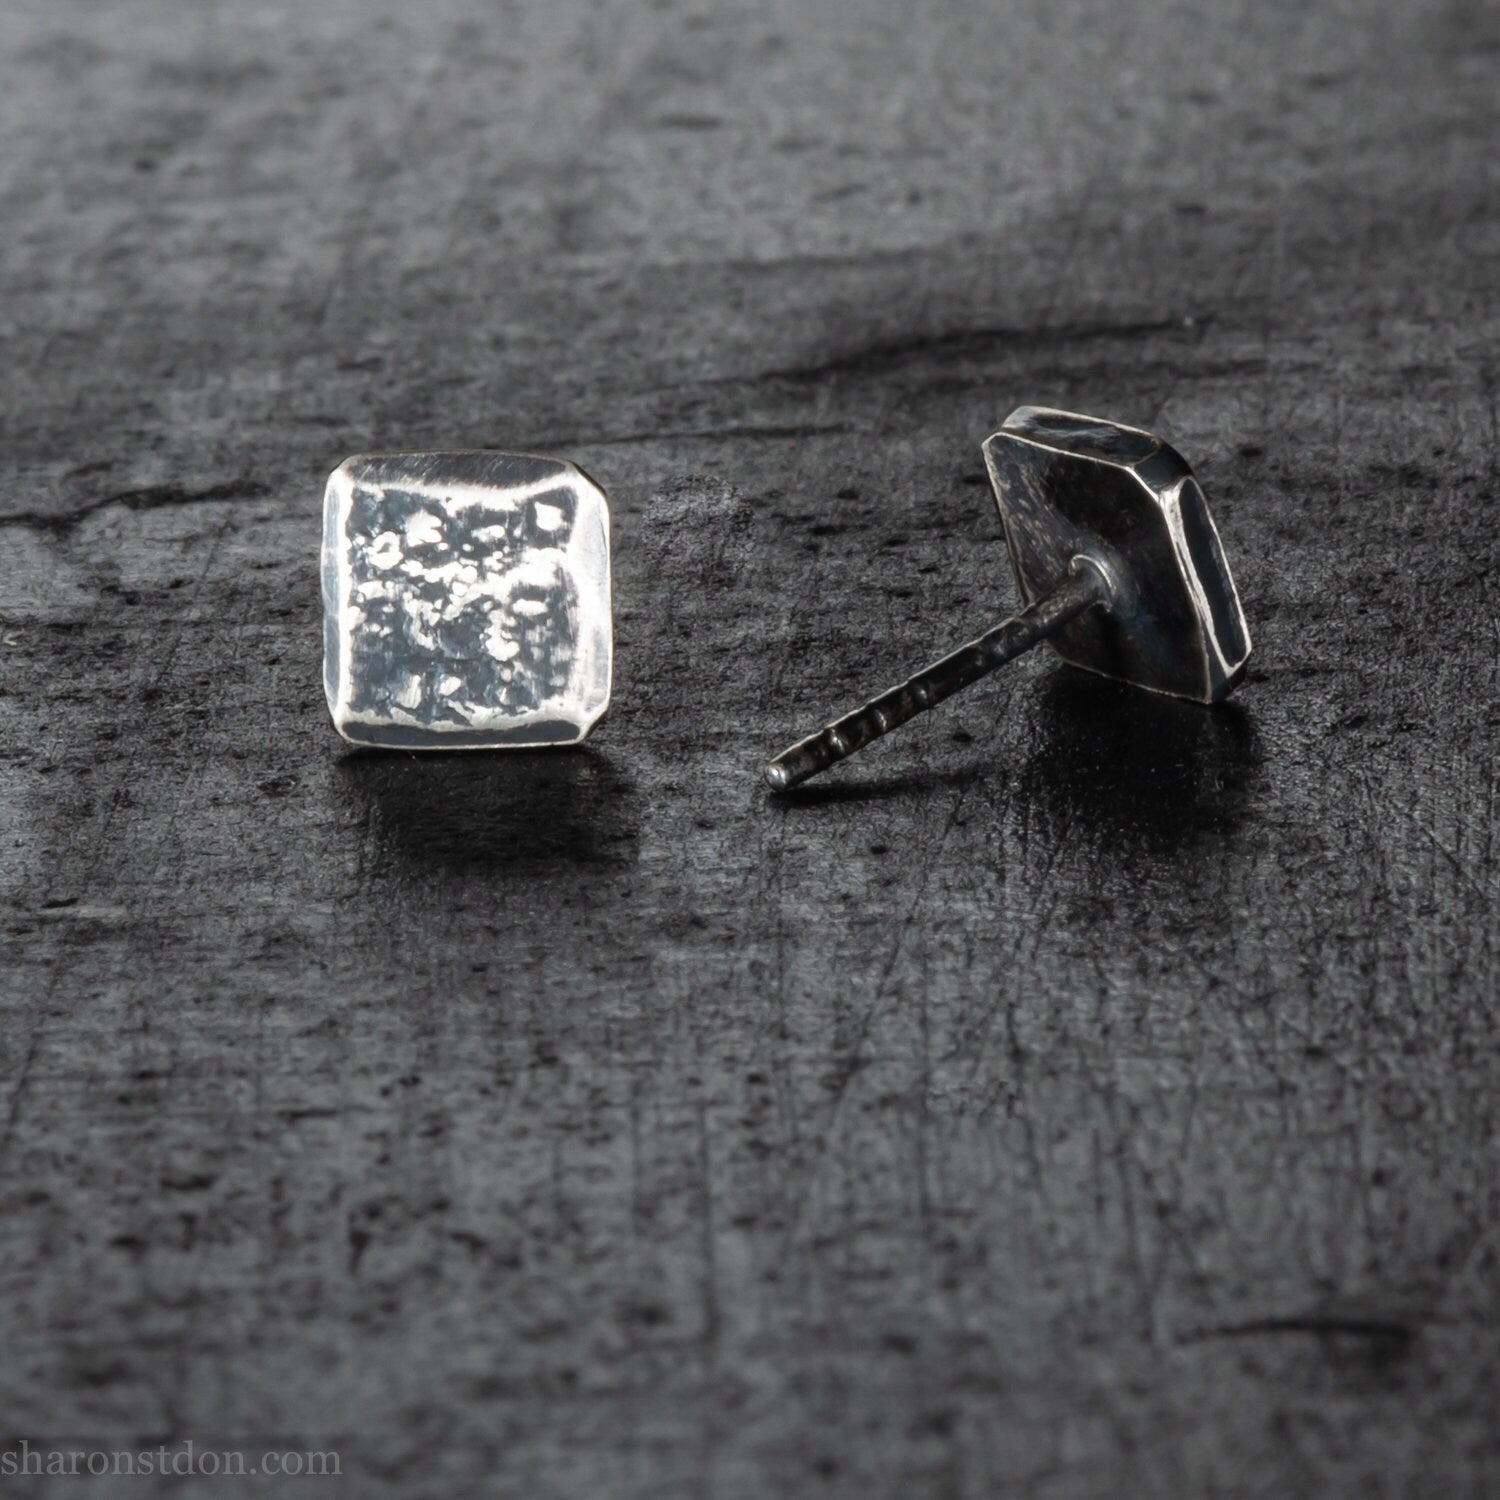 7mm square 925 sterling silver stud earrings, antiqued.